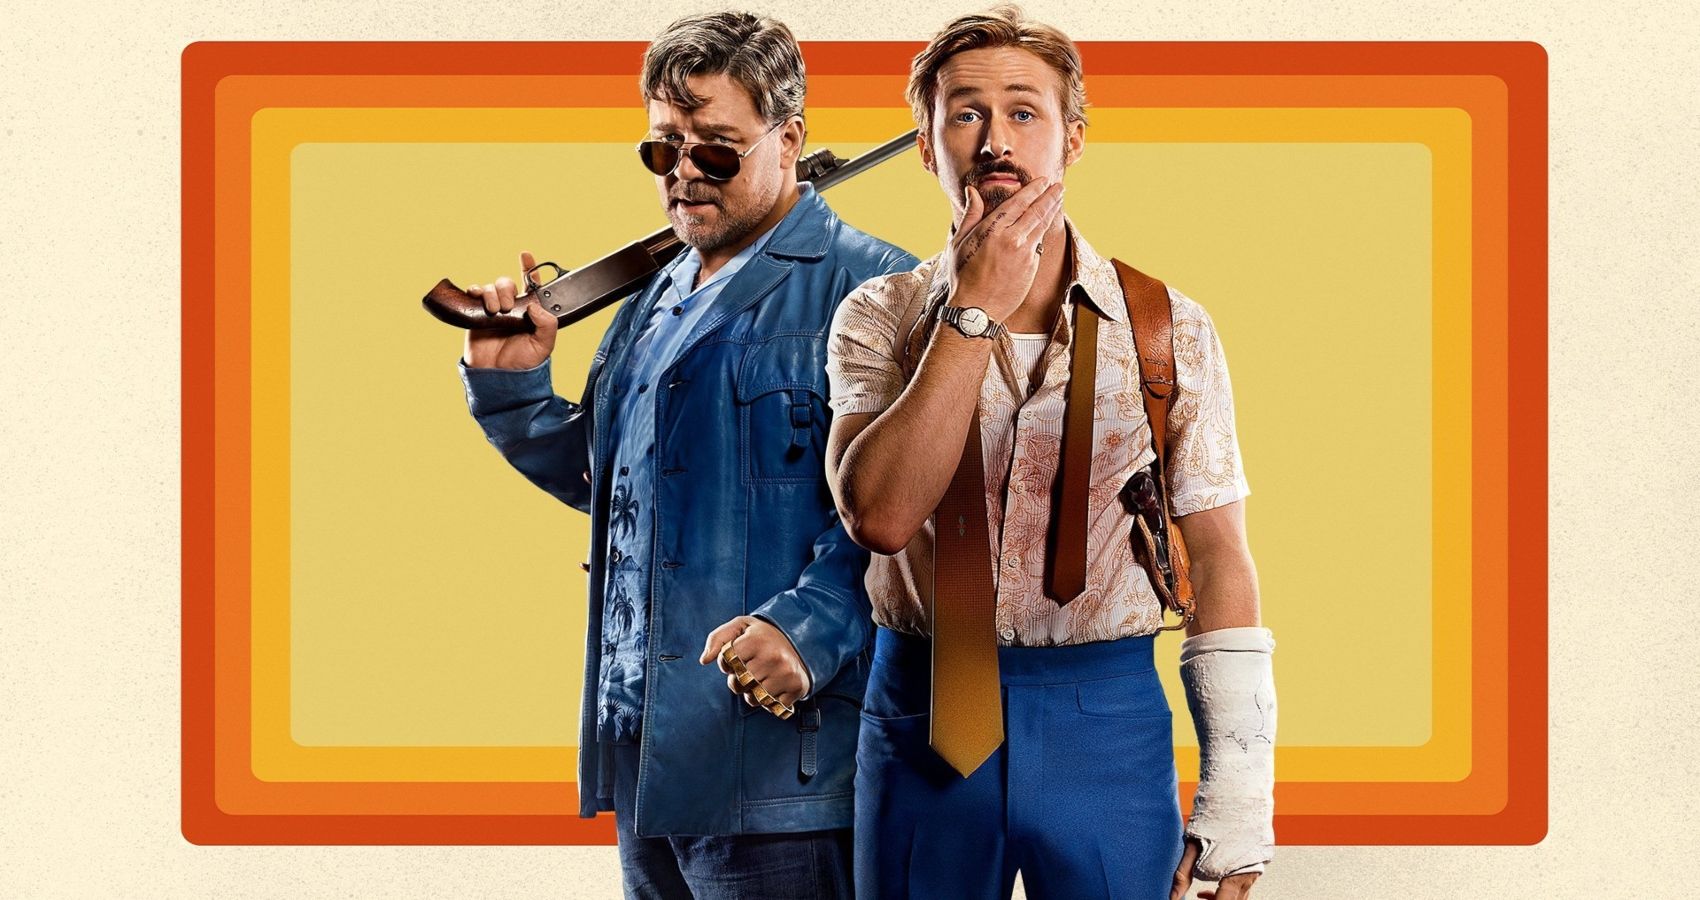 Ryan Gosling and Russell Crowe in The Nice Guys promo art